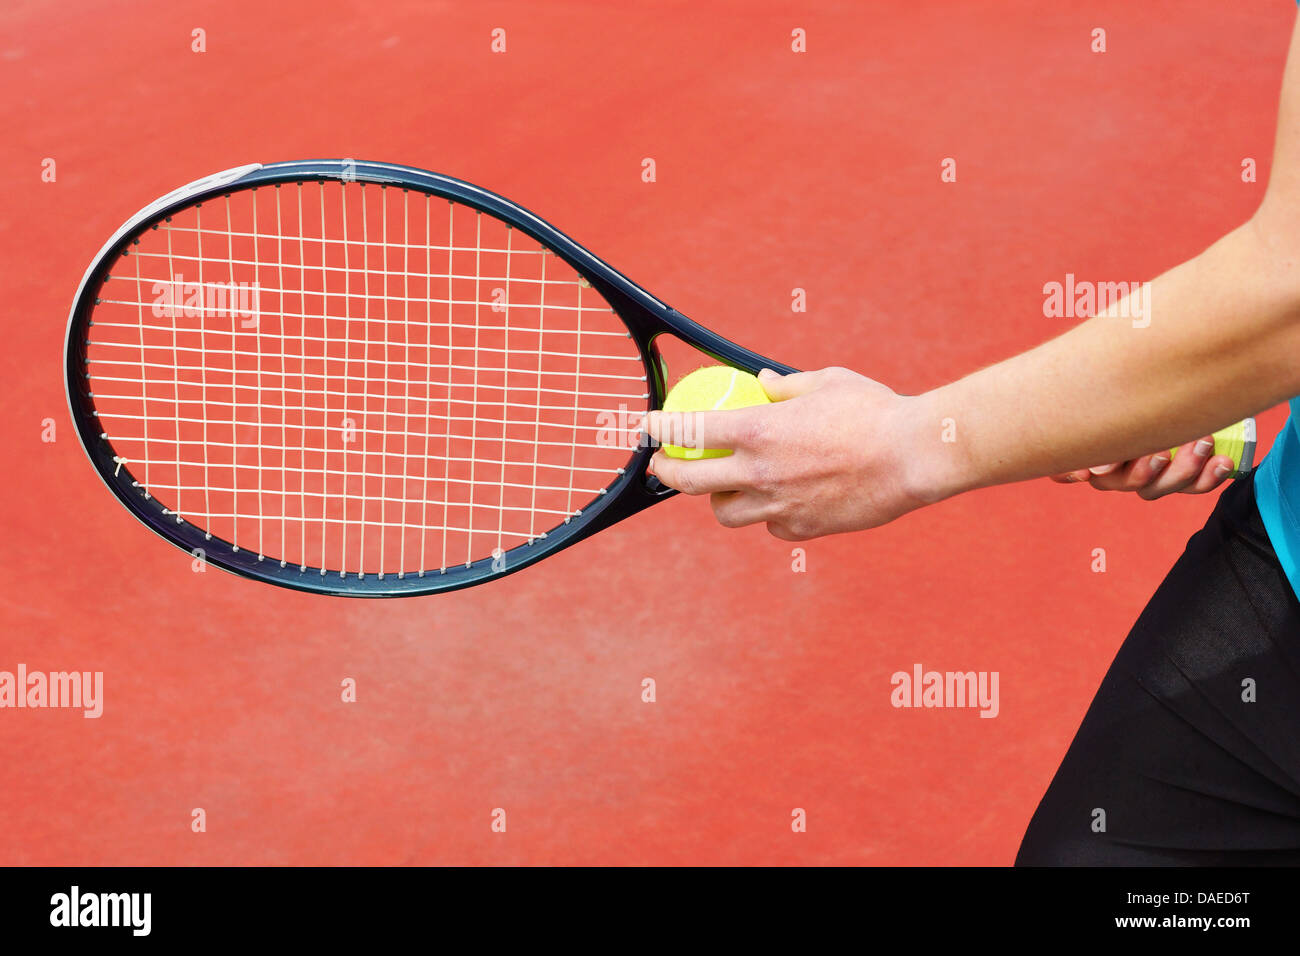 Player on hard court ready to serve the tennis ball with racket Stock Photo